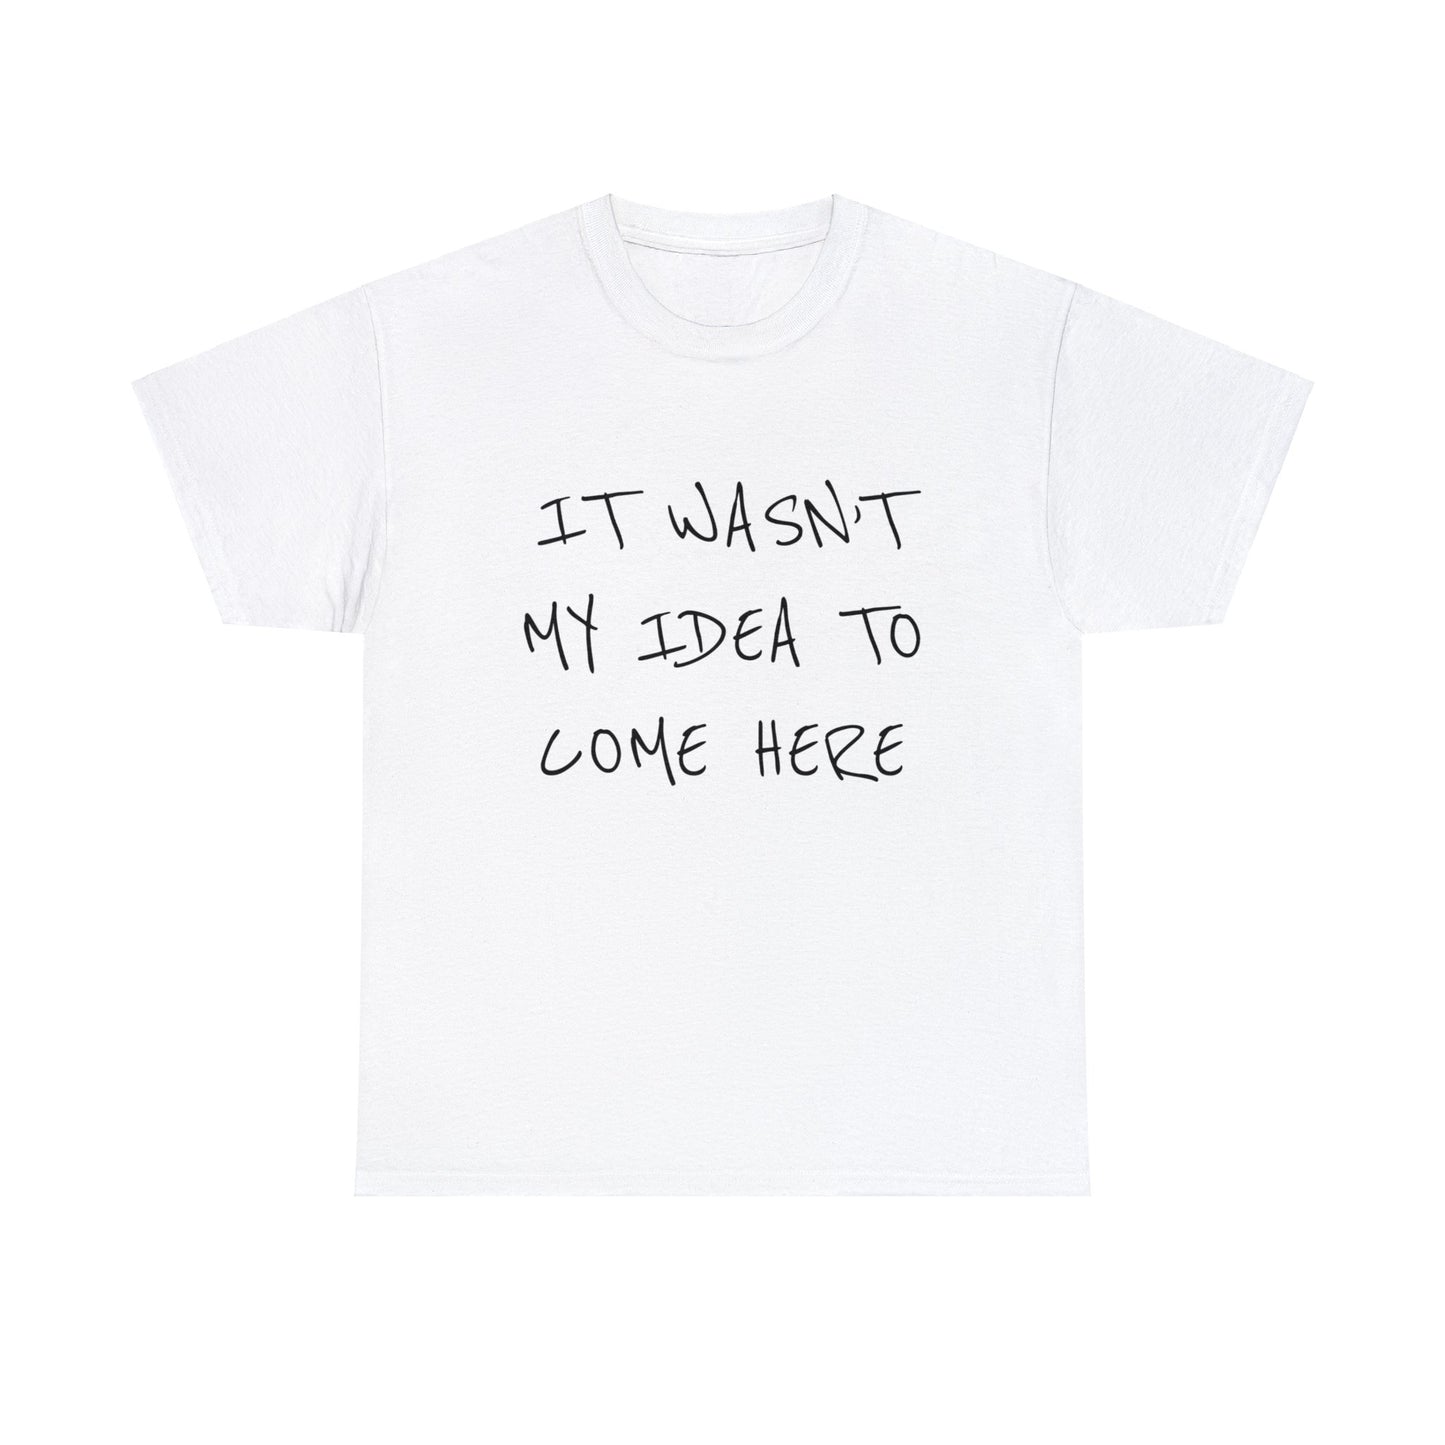 "IT WASN’T MY IDEA TO COME HERE" Text T-shirt Unisex Heavy Cotton Tee Simple Text for Travelers.